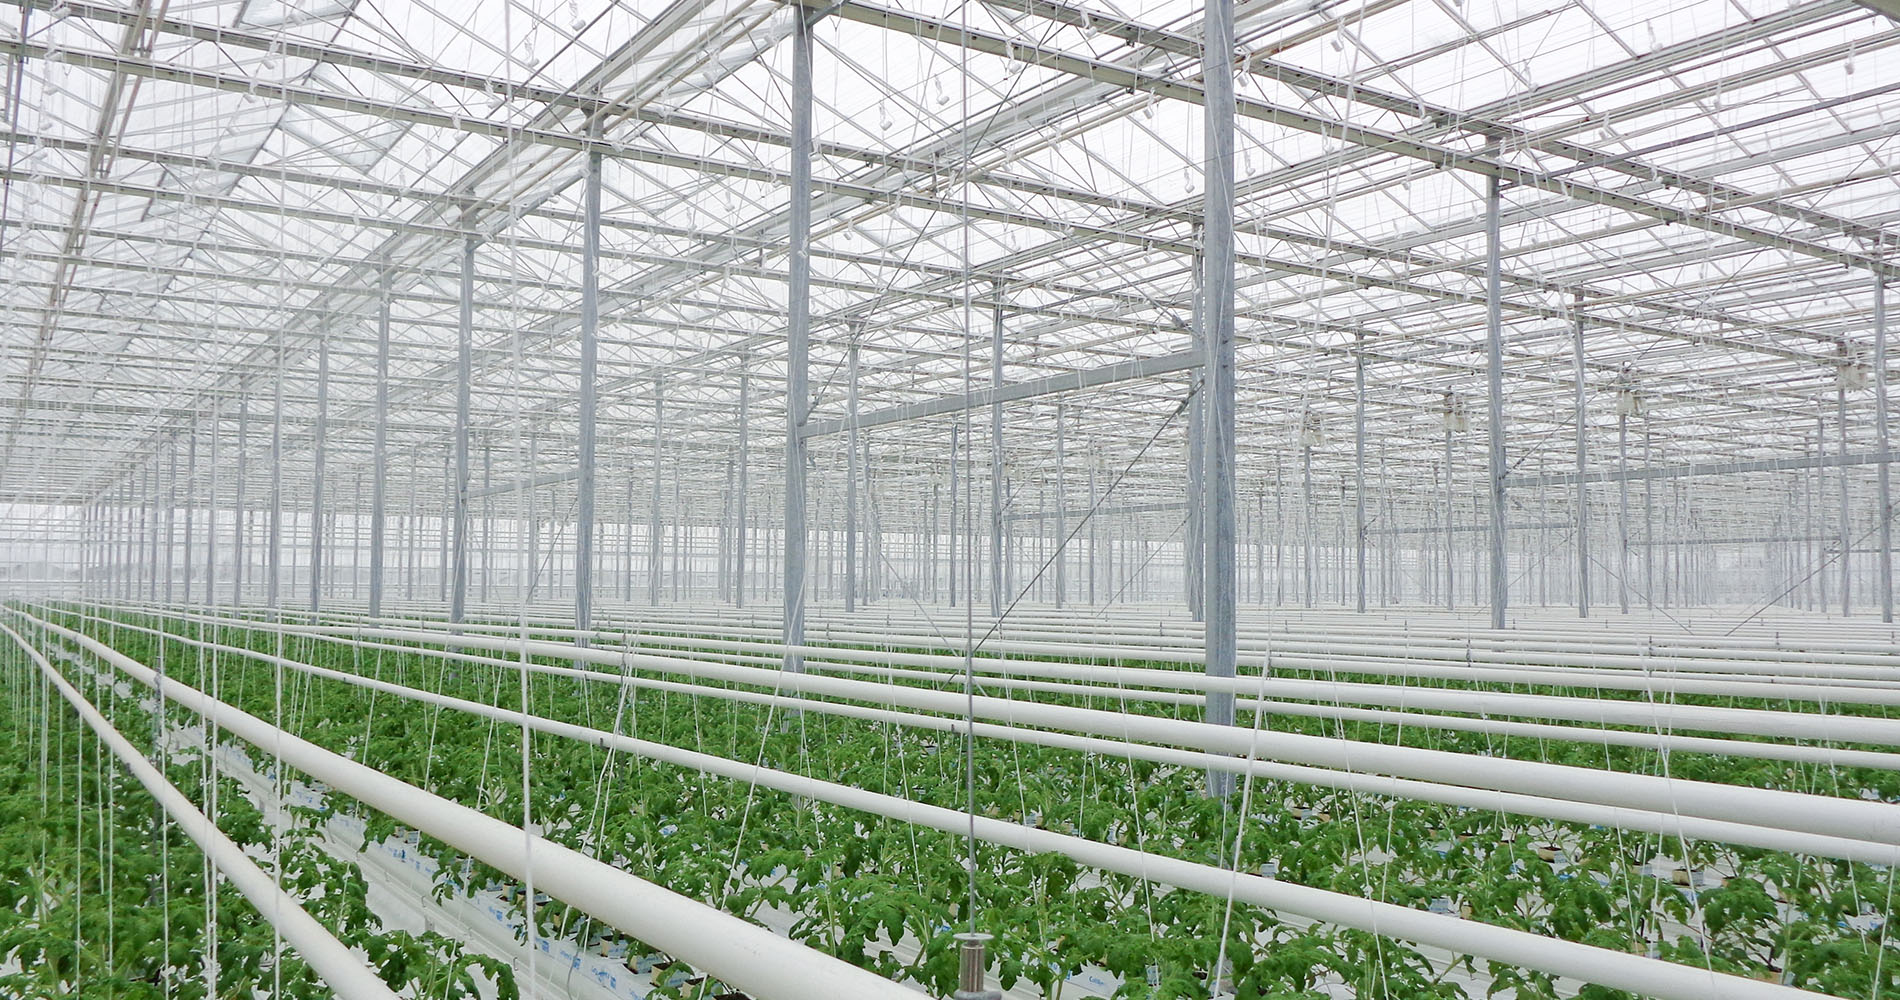 Greenhouse heating pipes and piping design